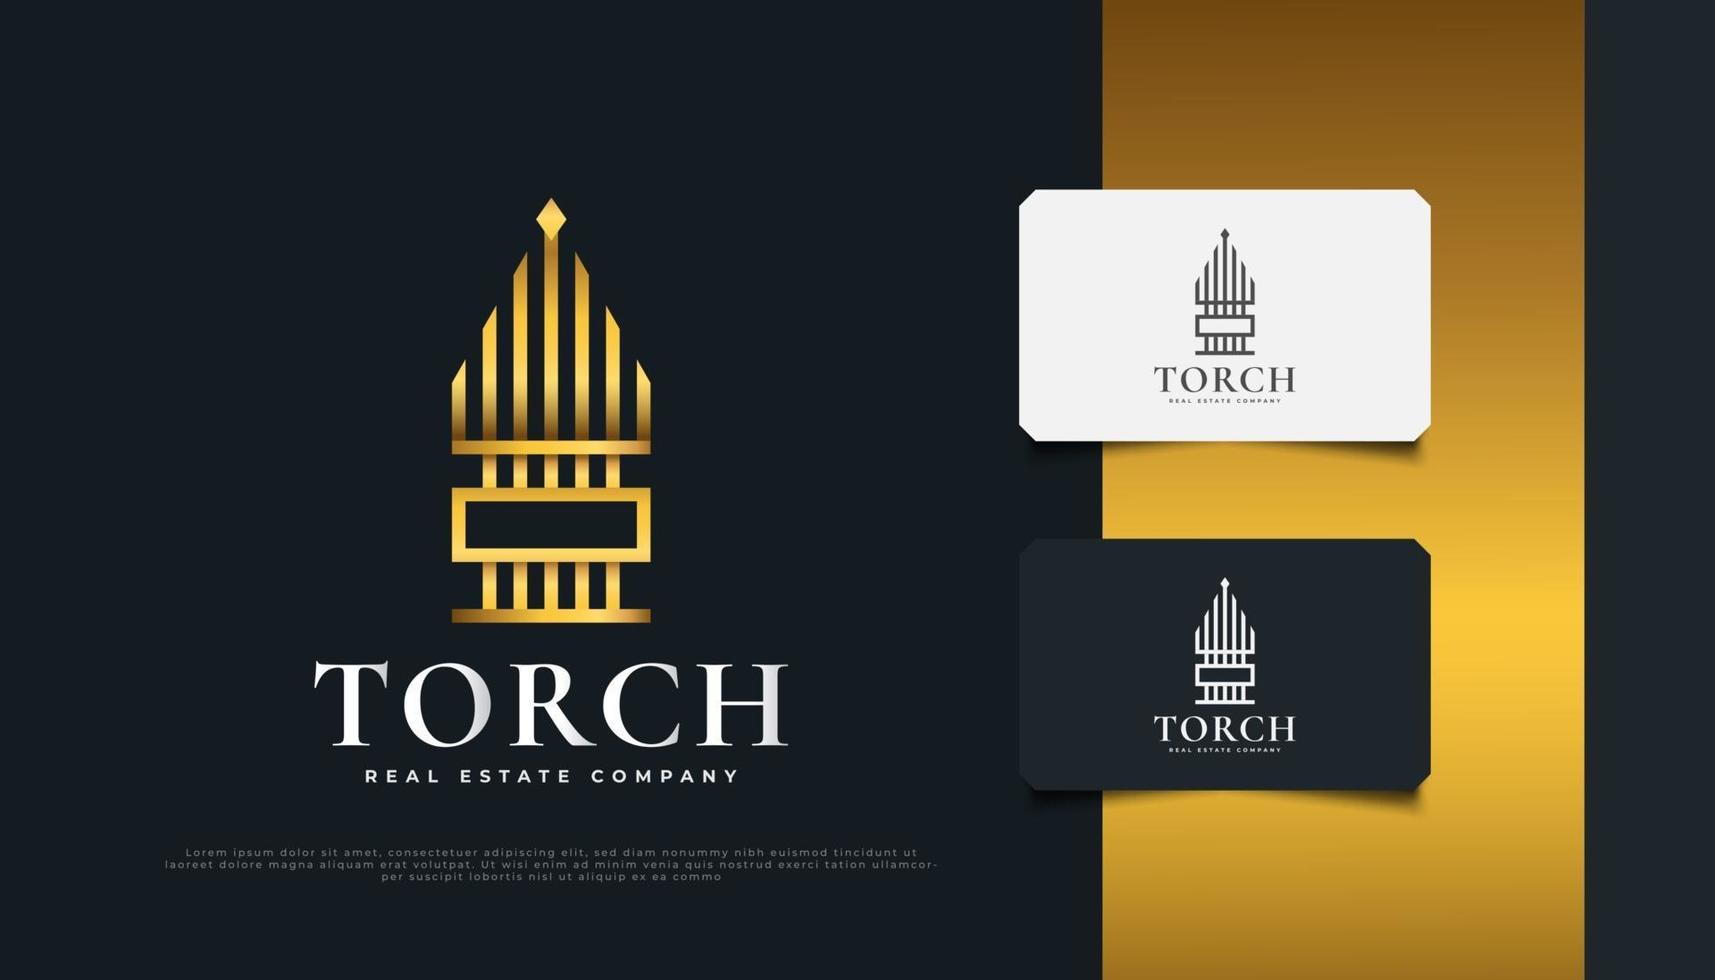 Real Estate Logo Design with Torch Concept in Gold Gradient. Construction, Architecture or Building Logo Design vector